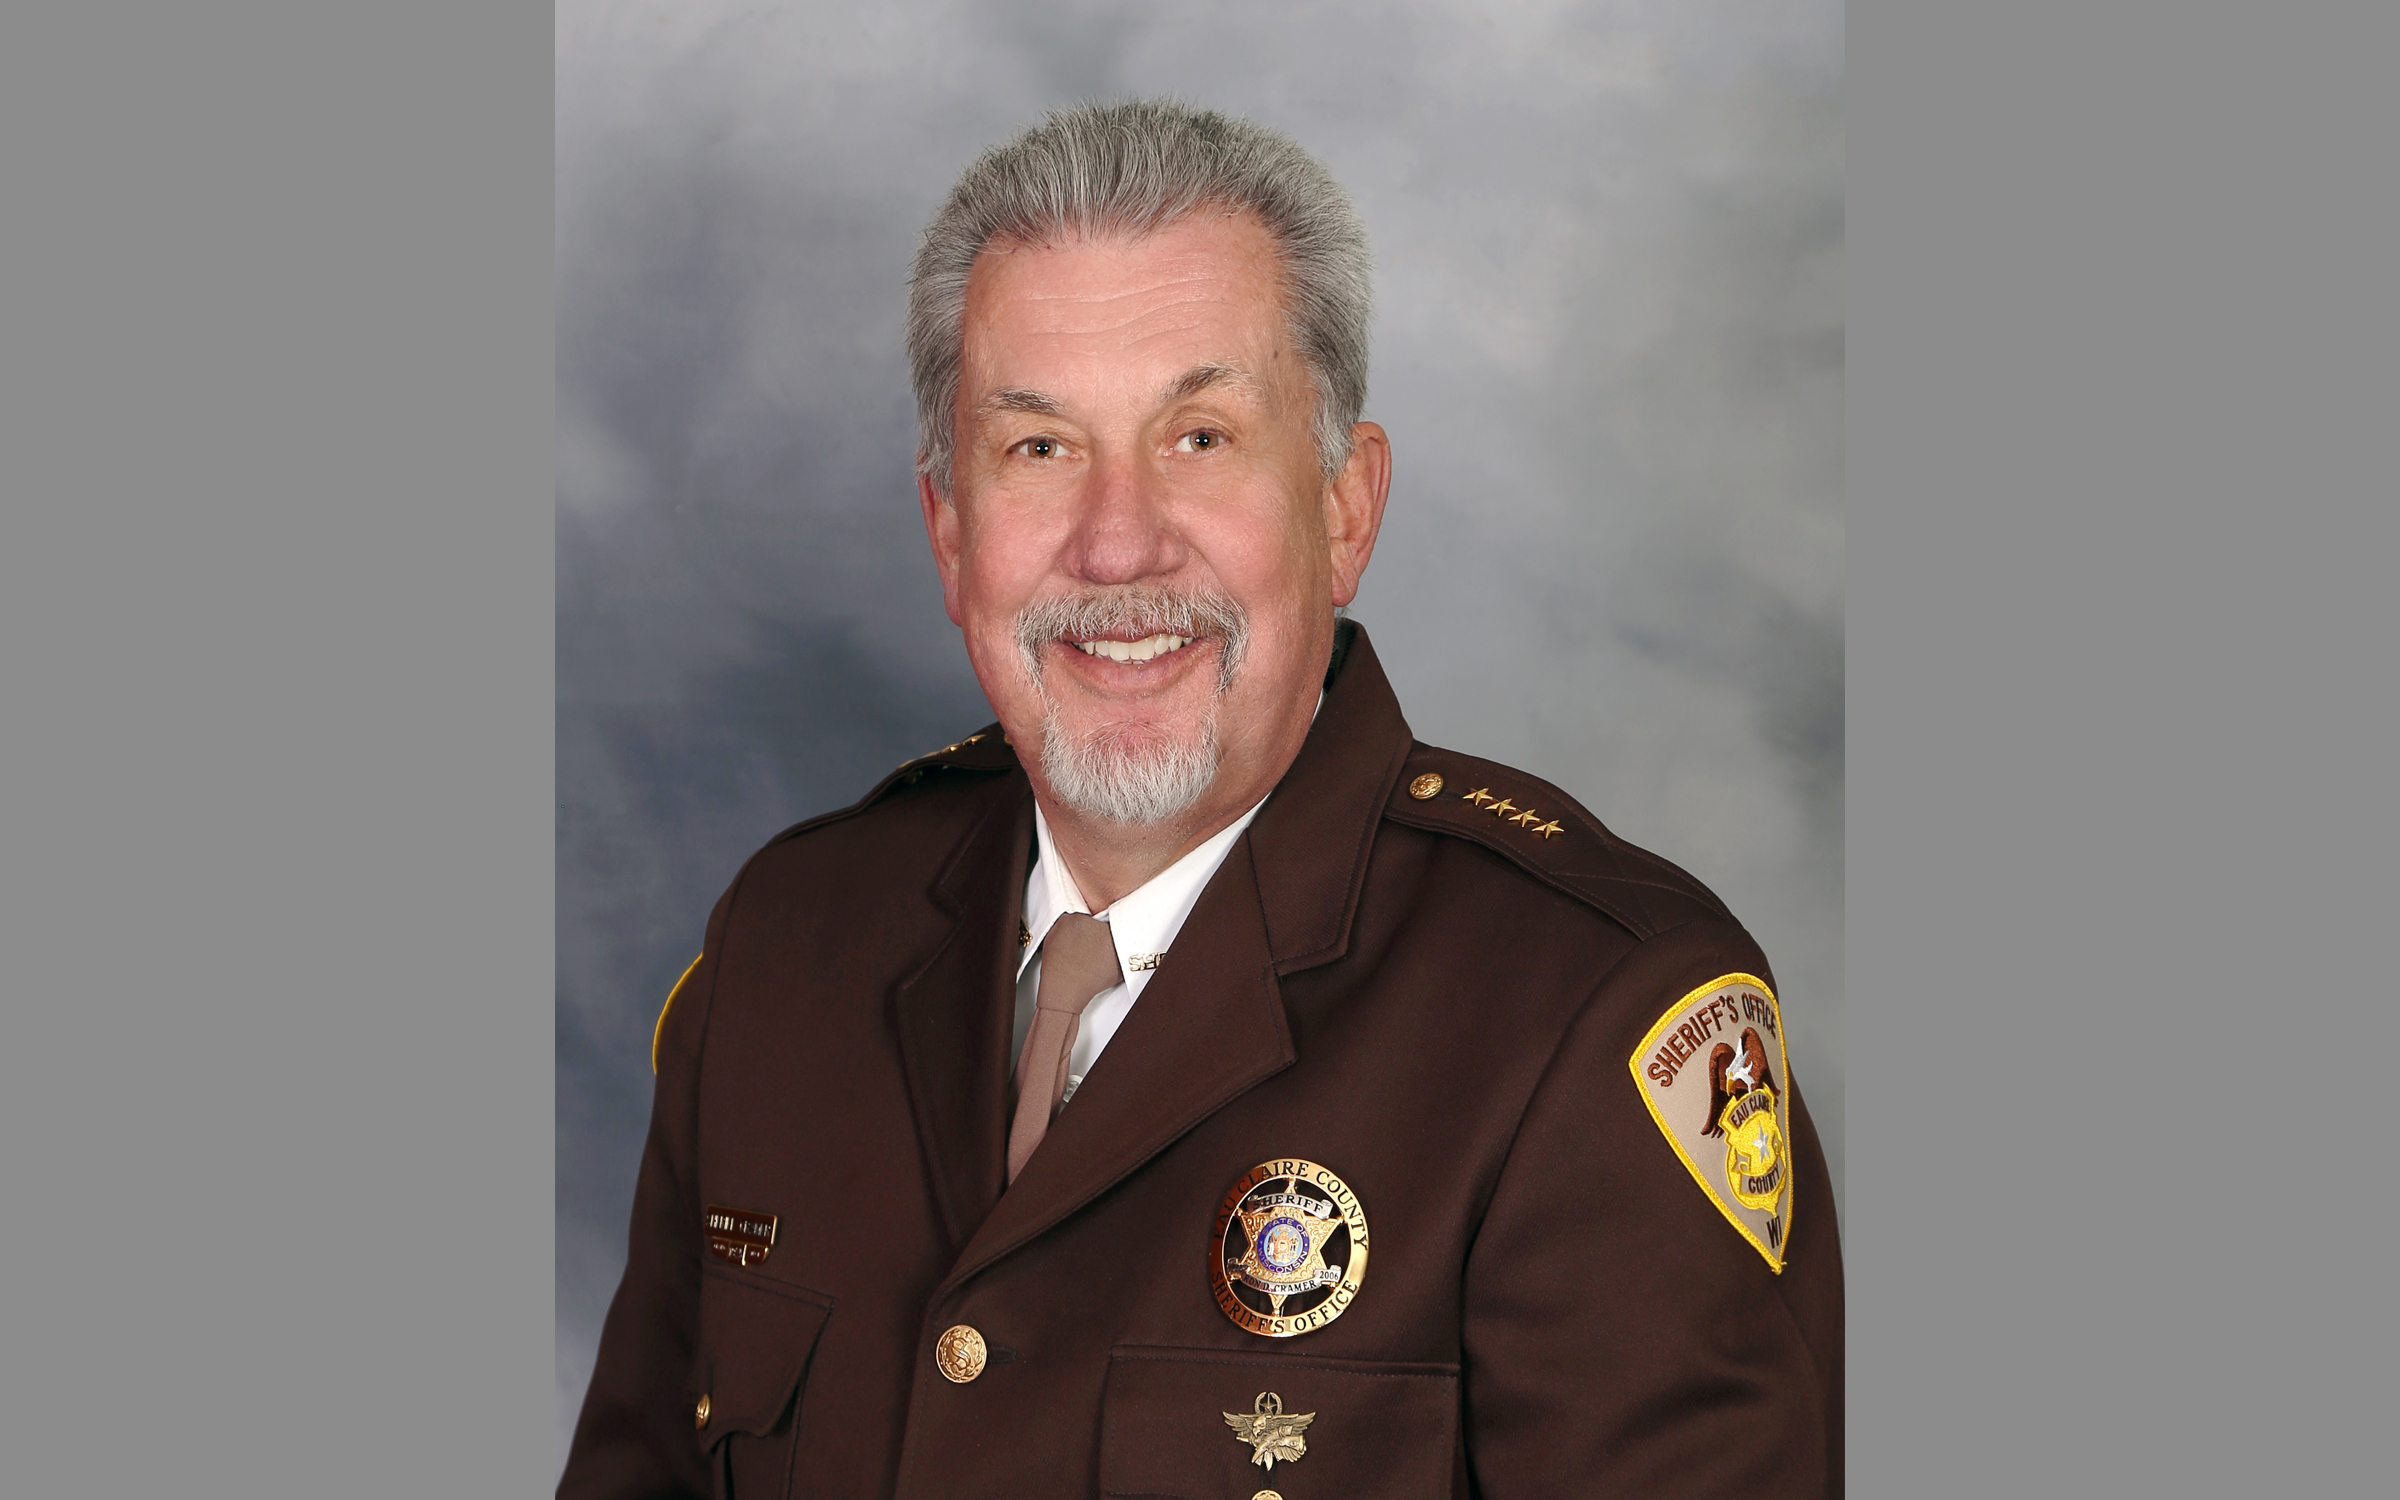 Investigation: Longtime Eau Claire County Sheriff died by suicide